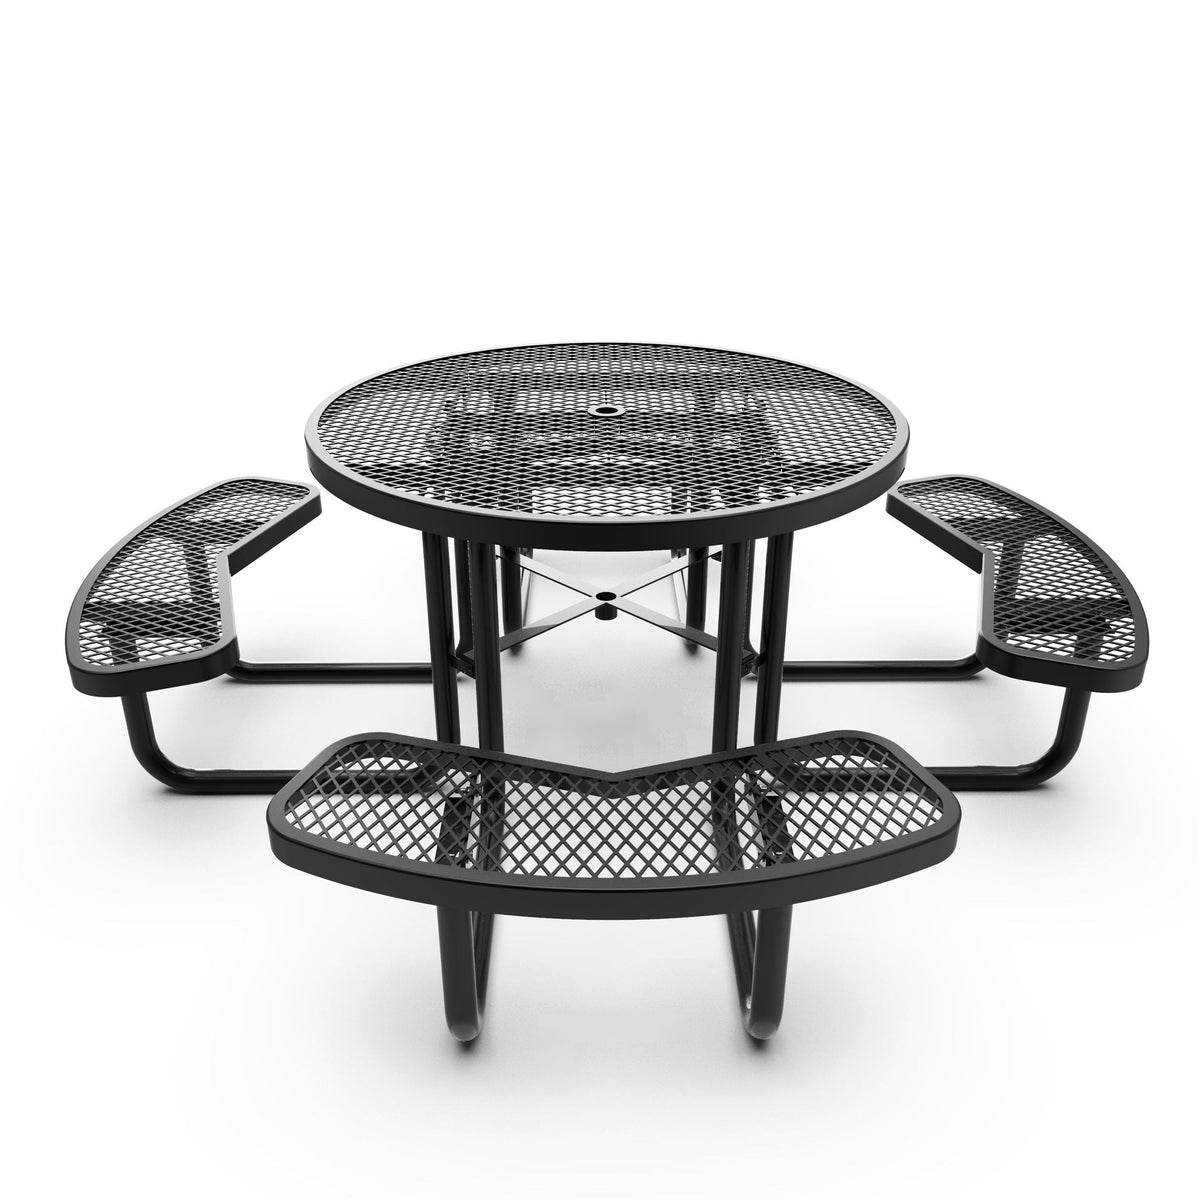 Black |#| Commercial 46 Inch Round Expanded Mesh Metal Picnic Table with Anchors - Black